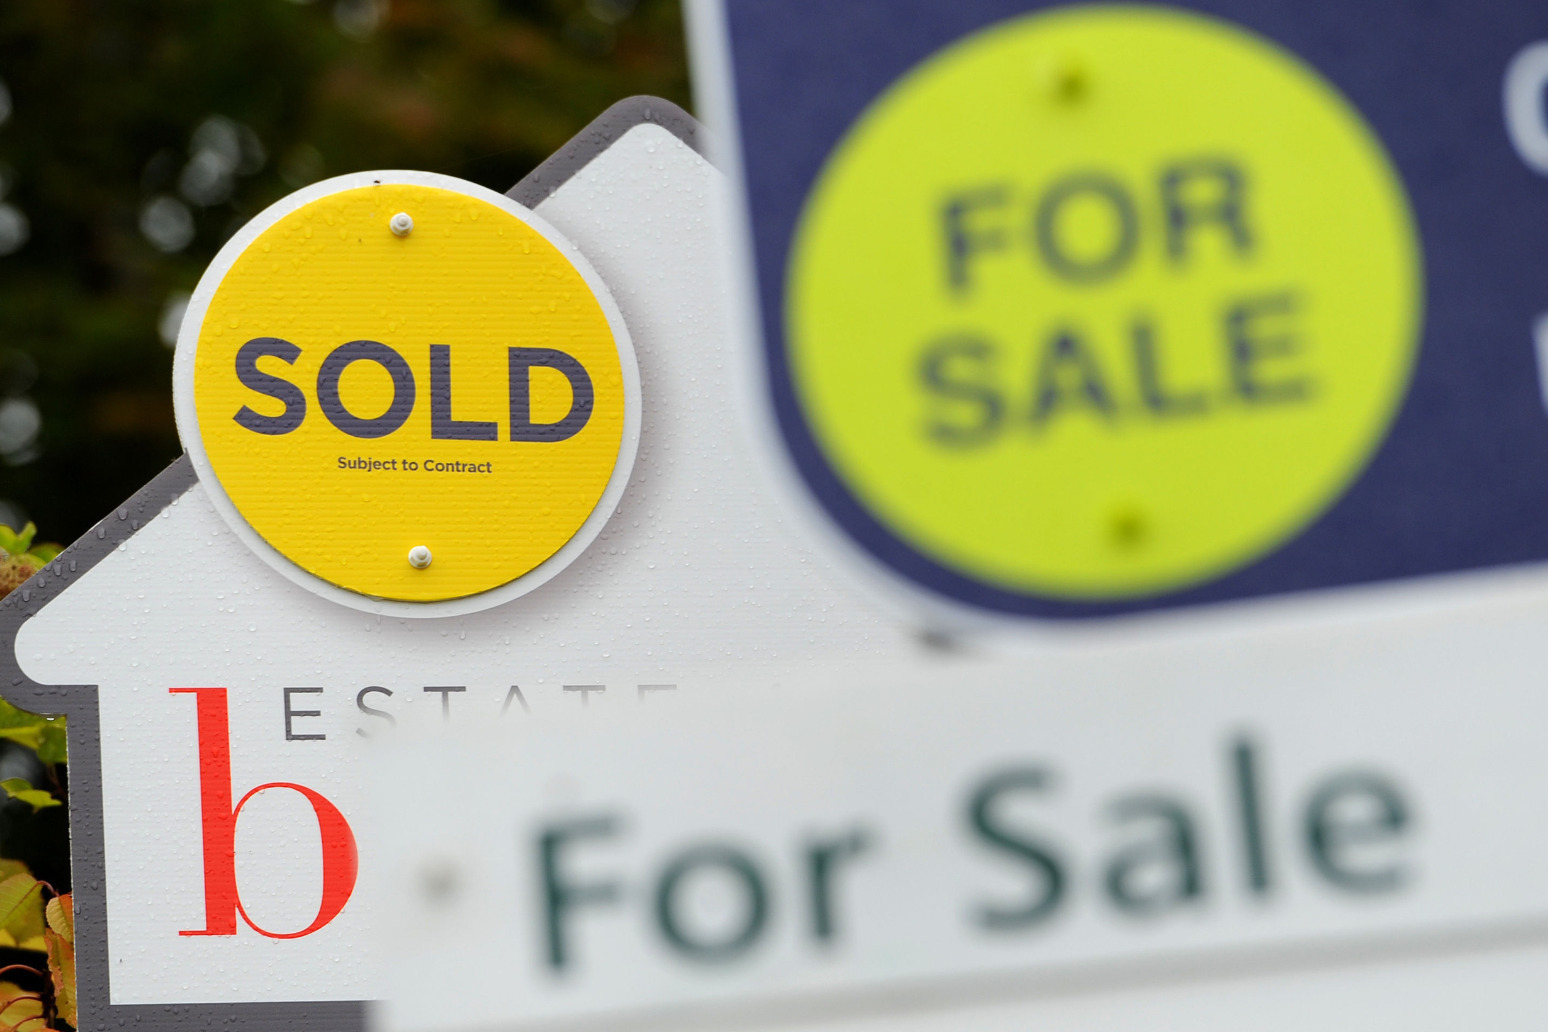 Cash strapped homeowners urged to look for cheaper mortgage deals as rates rise